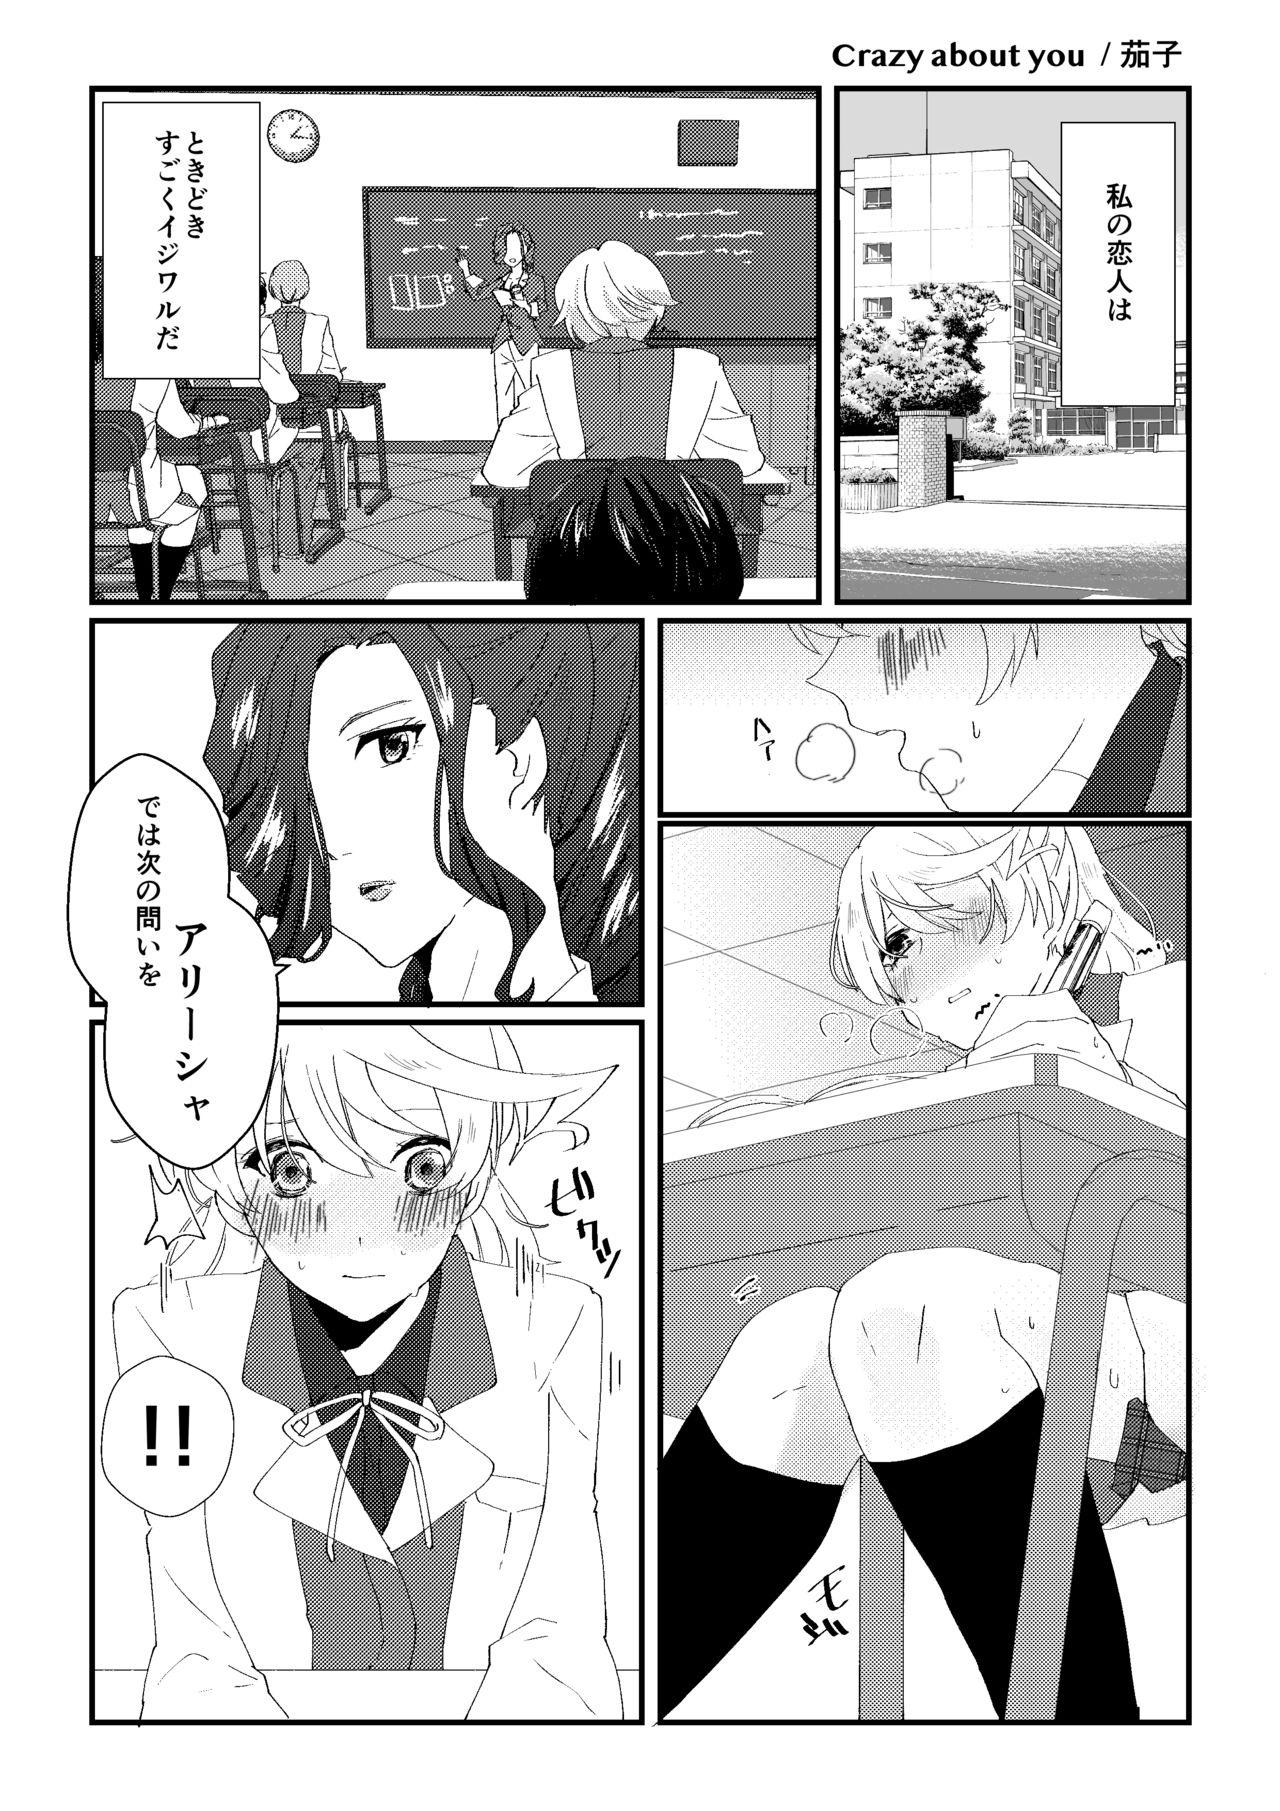 Pussylick crazy about you - Tales of zestiria Group Sex - Page 2